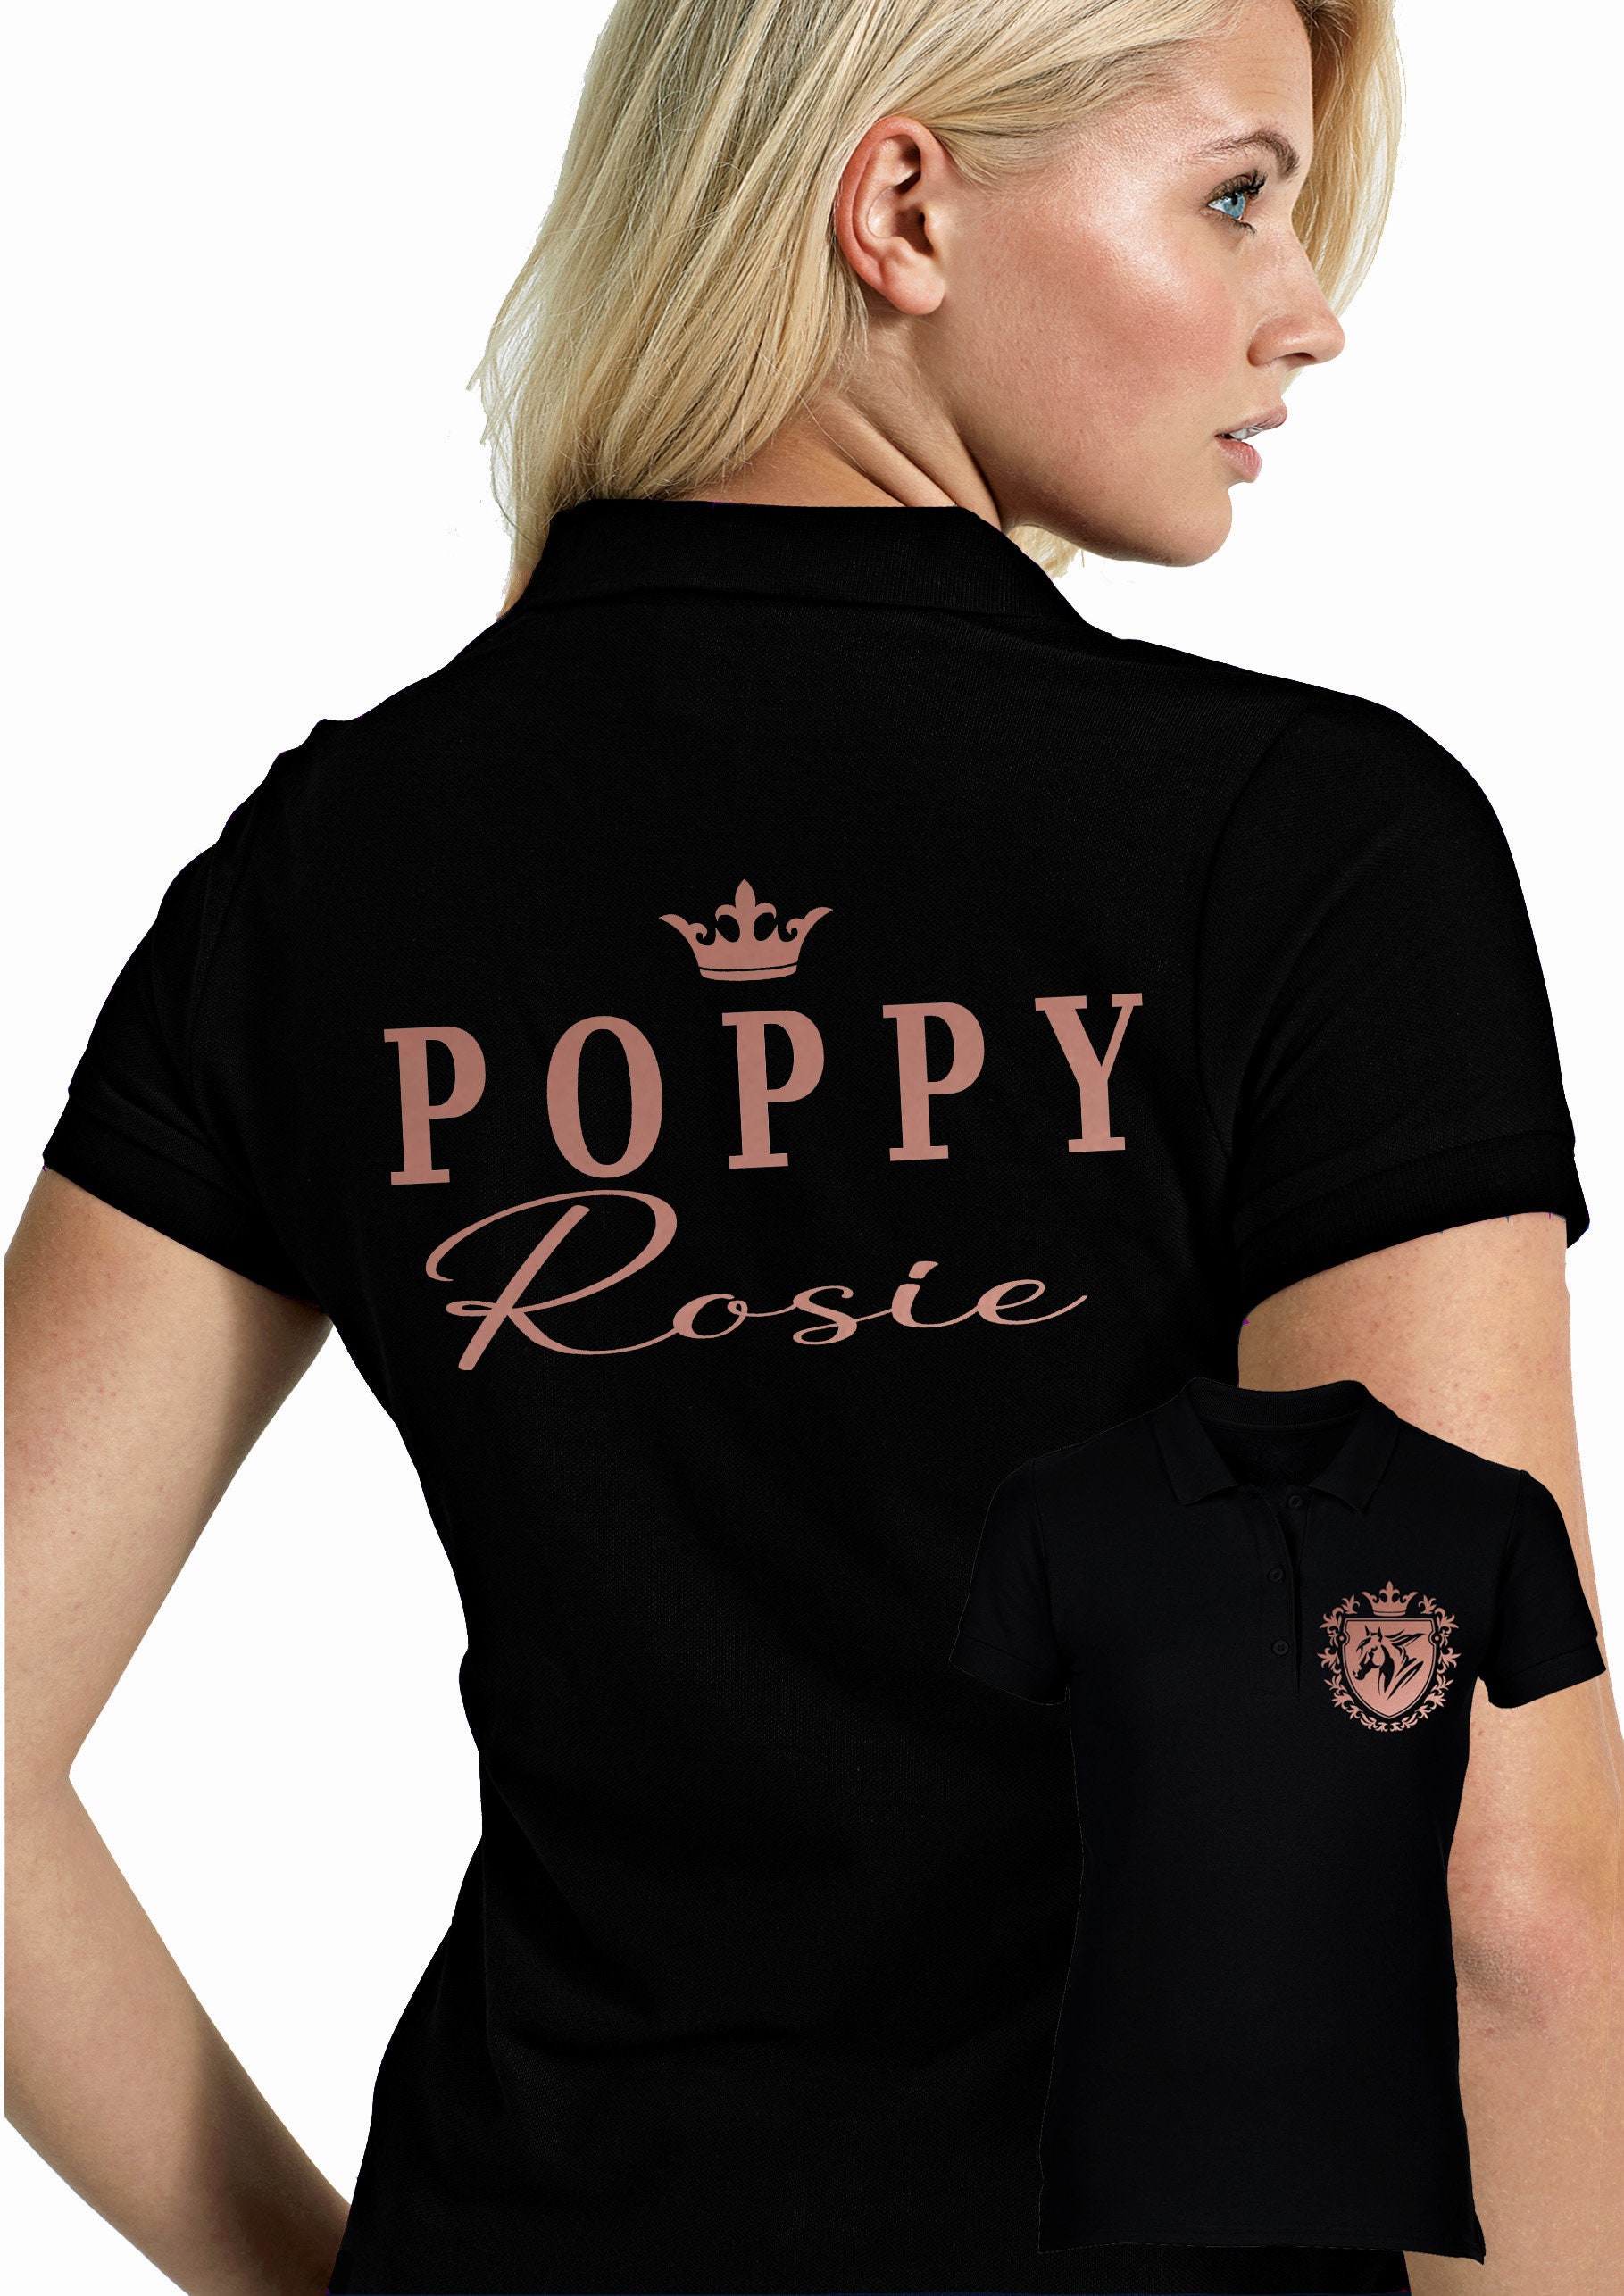 Horse Lover Gift, personalised Horse Riding Ladies Polo Shirt equestrian leisure wear Boasting breast shield & back pearlescent print Kleding Dameskleding Tops & T-shirts Polos 